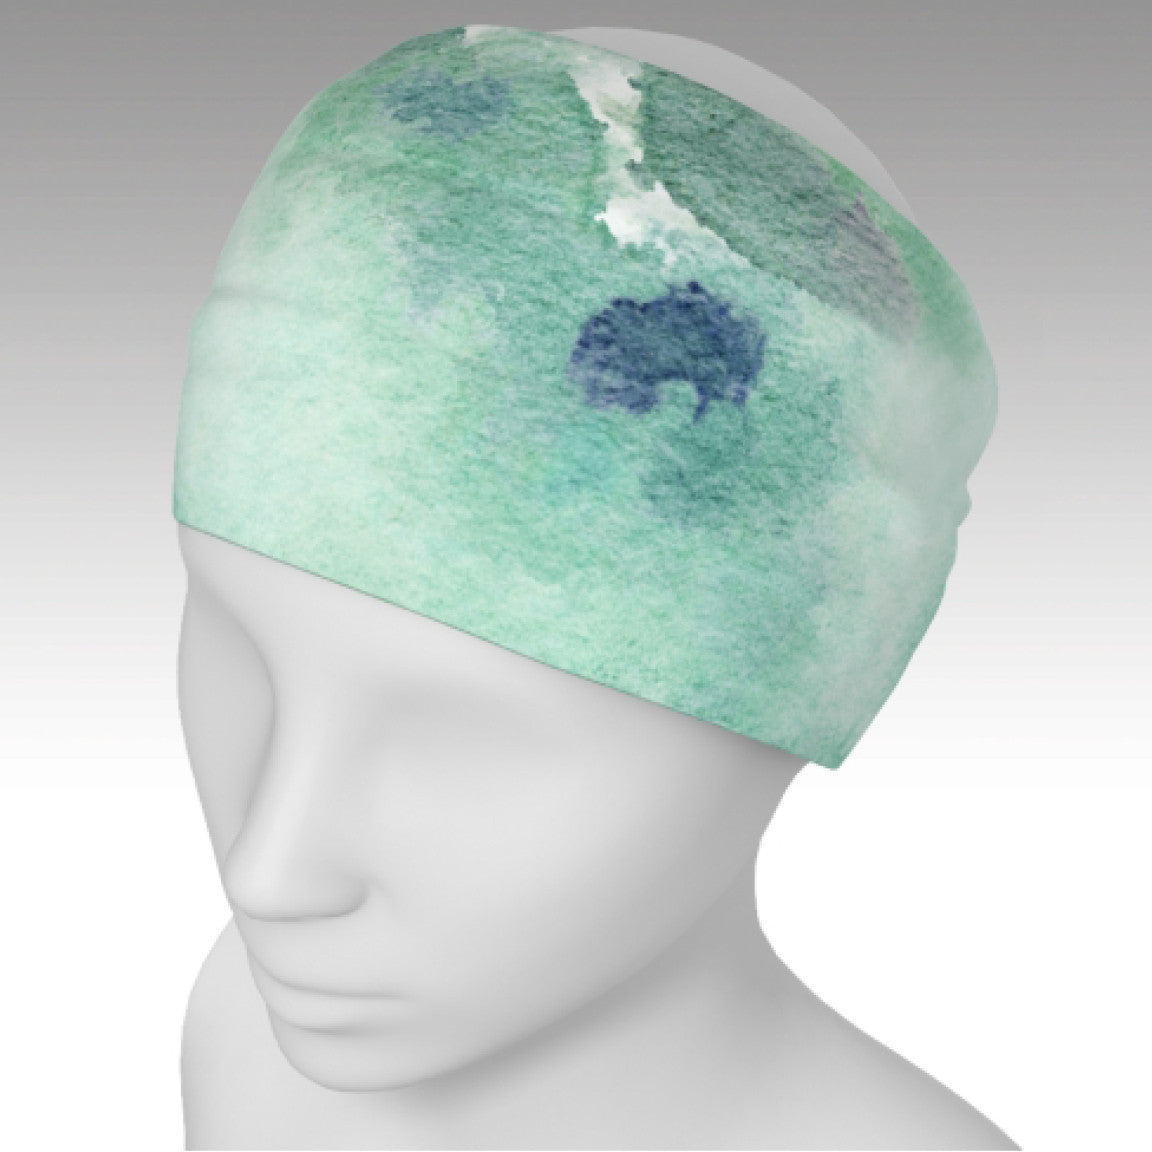 Headband with soft watercolor print of the sky / clouds.  Blue, green, white.  Full wrap around design can be used as a scarf. Keeps your hair back.